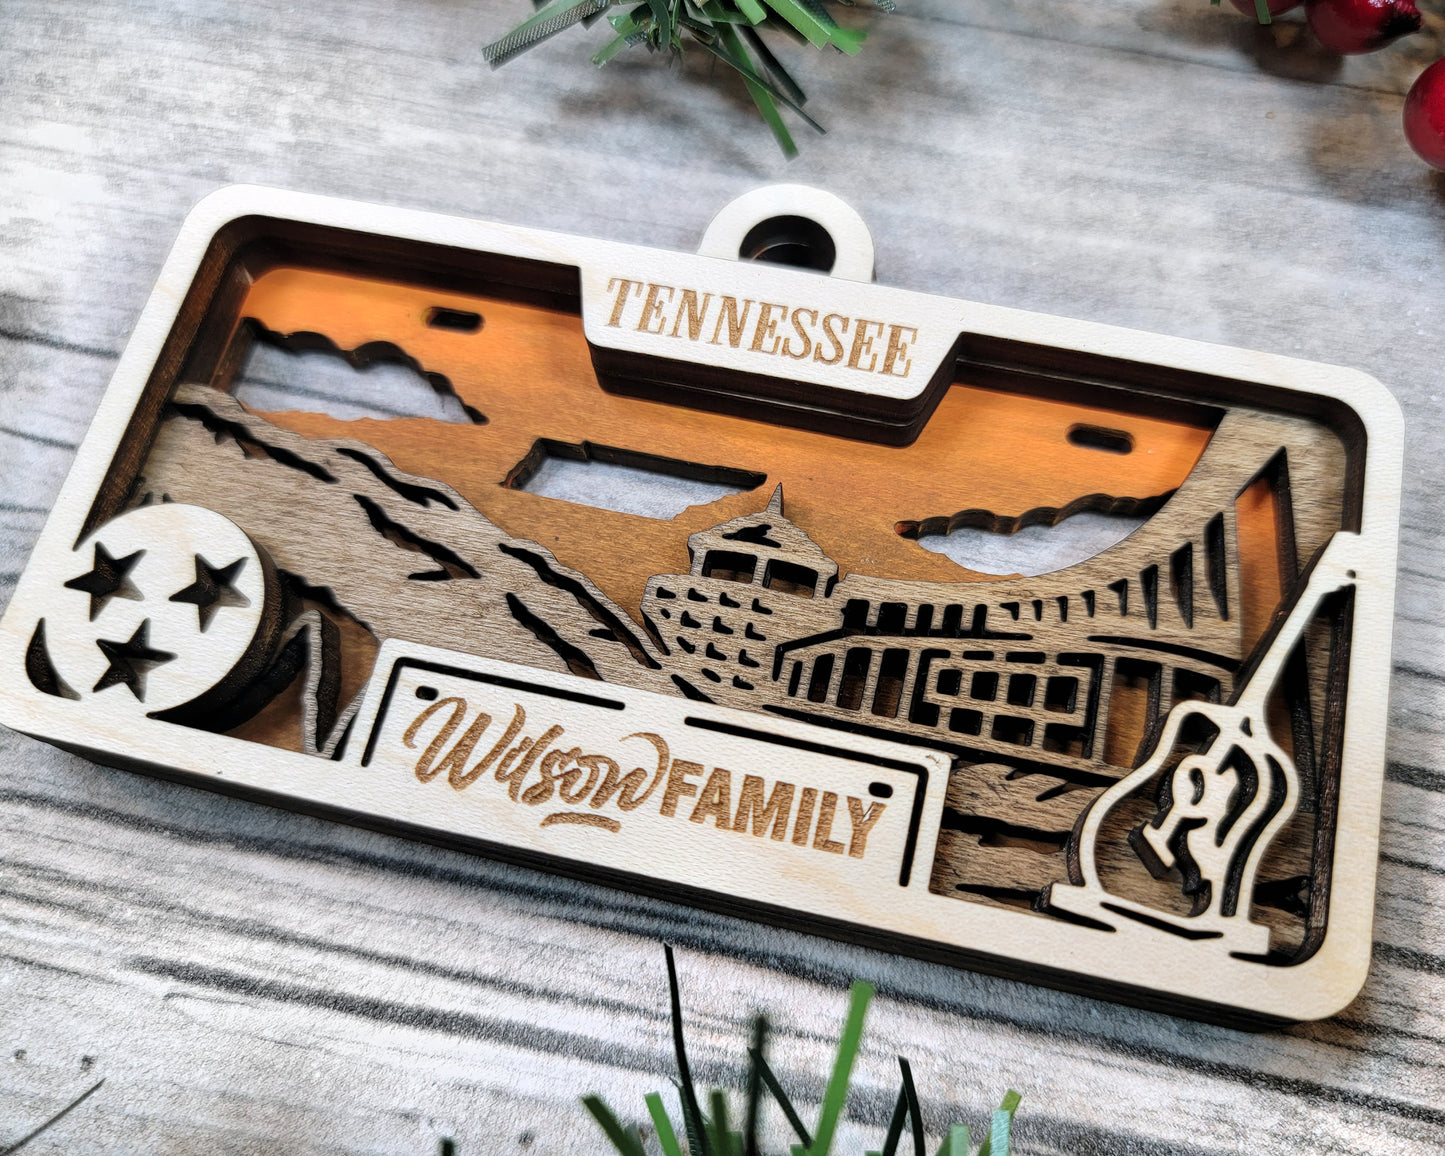 Customizable Tennessee Ornament